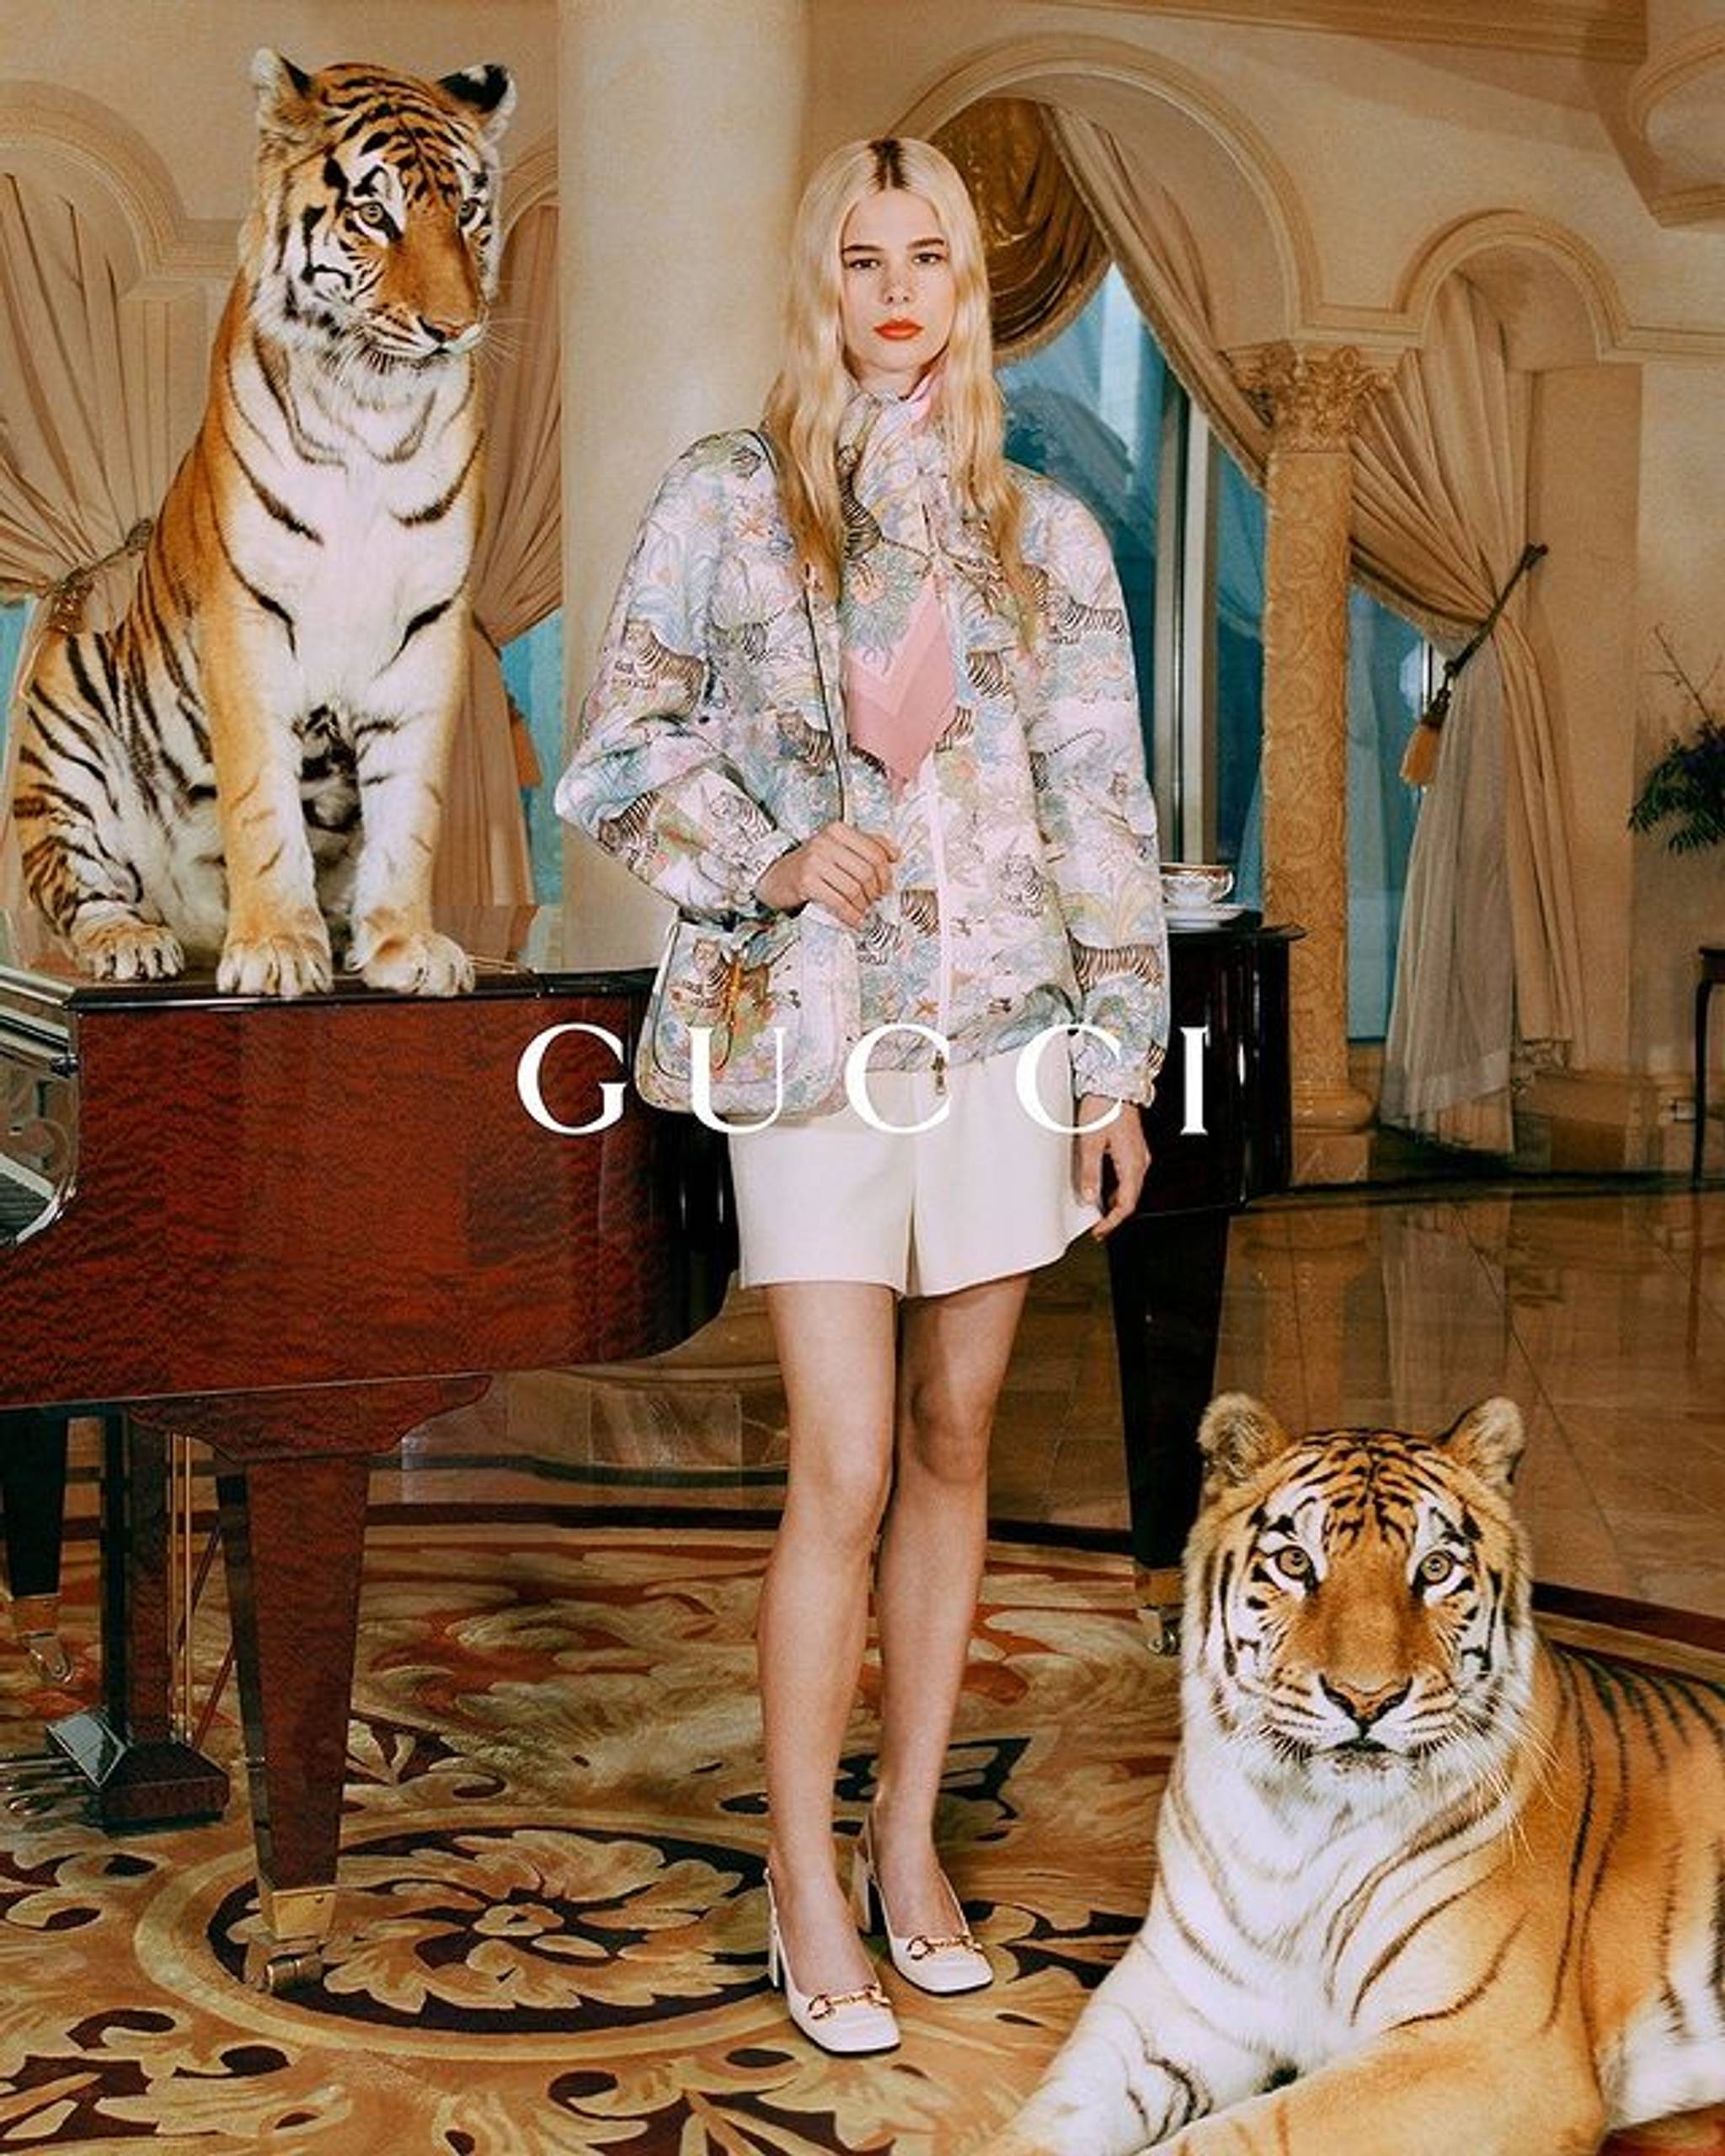 Prada and Gucci channel the tiger for Chinese New Year